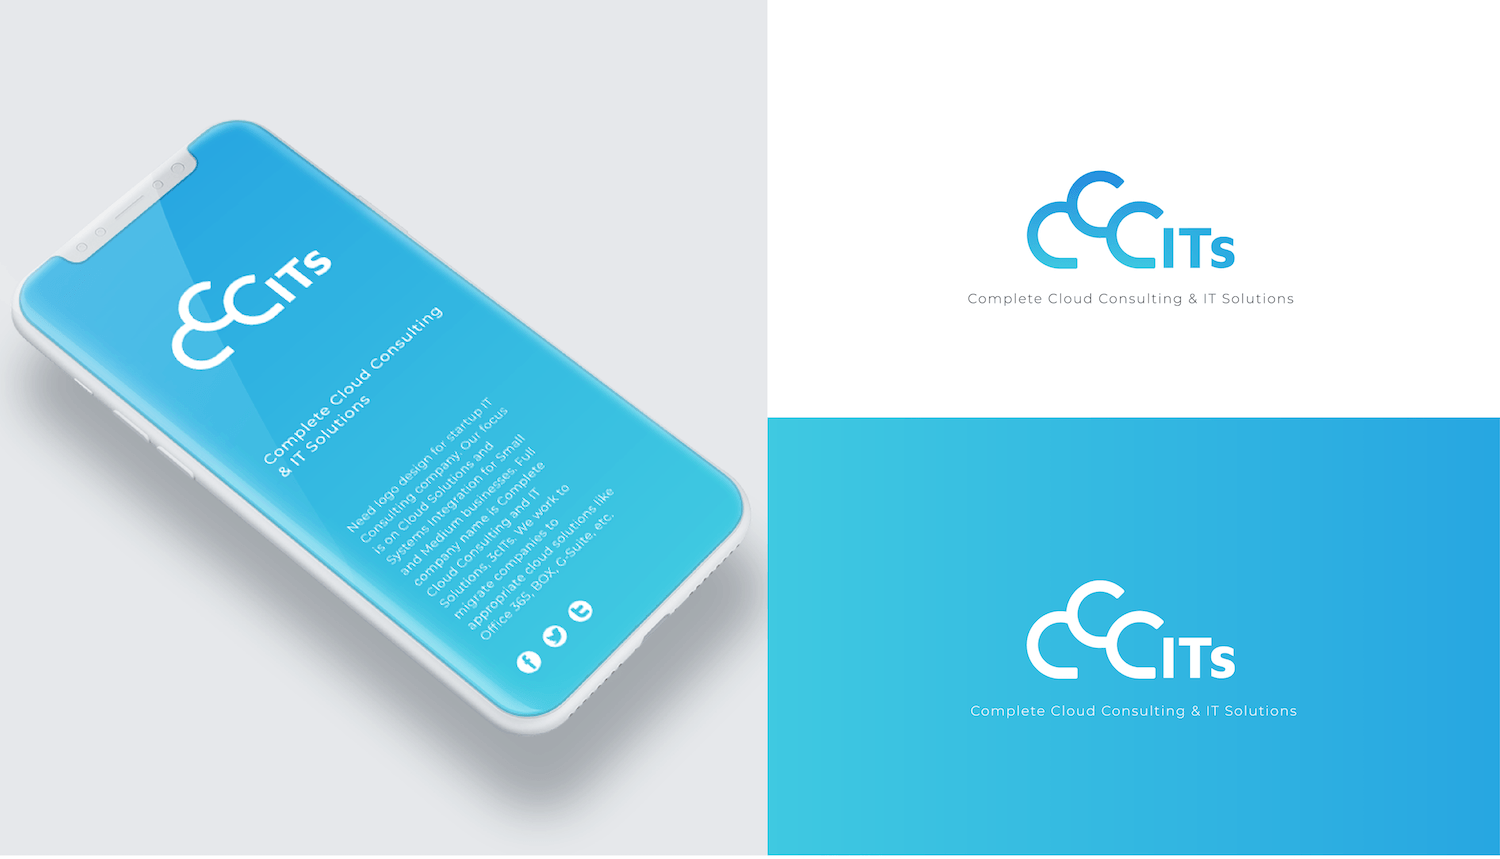 Cloud Company Logo - Modern, Conservative, It Company Logo Design for 3cITs or Company